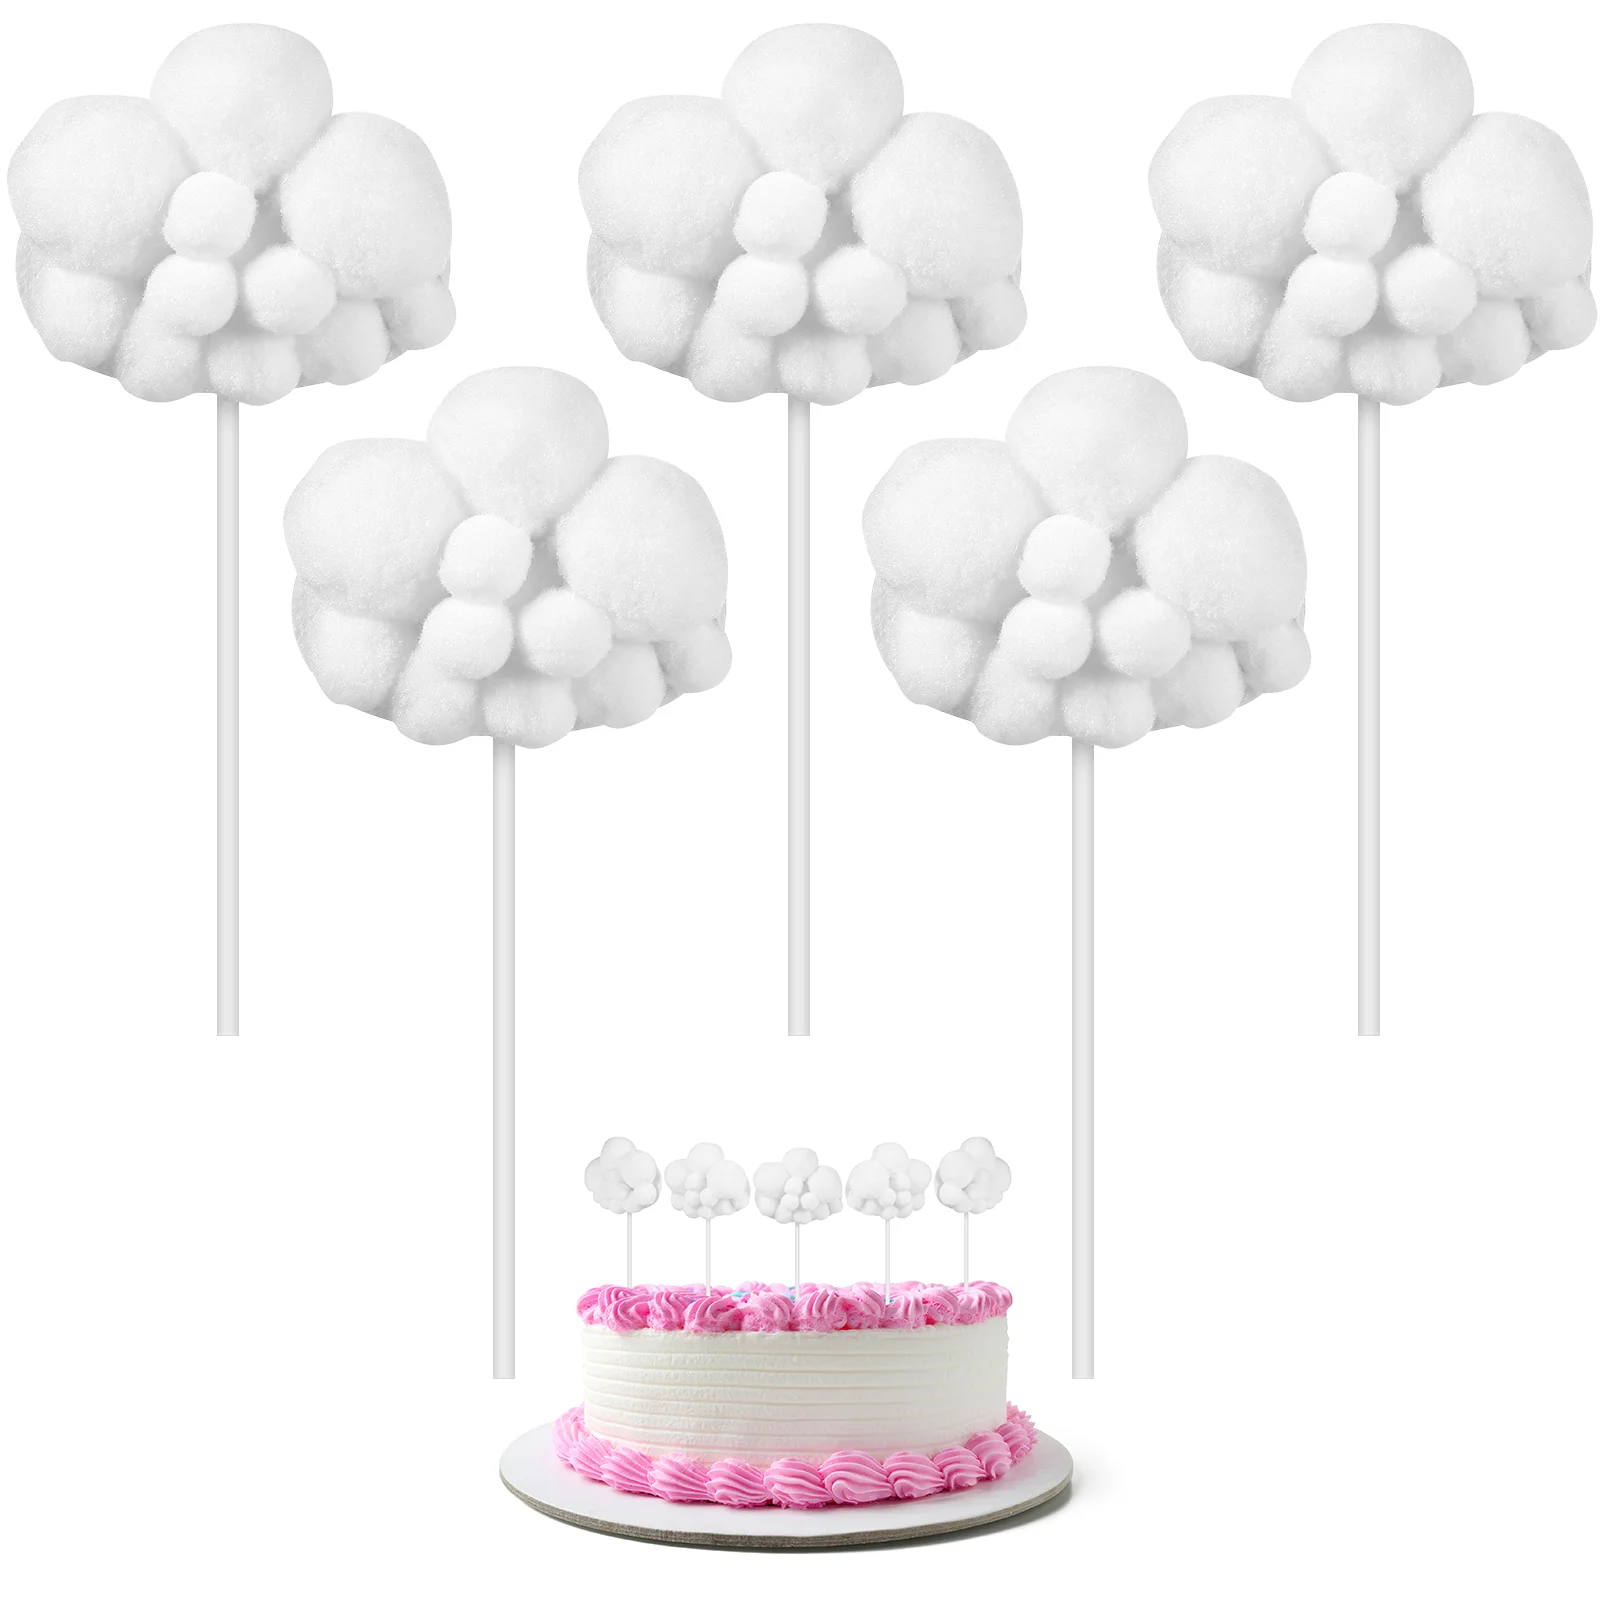 

5 Pcs Cloud-shape Decorative Birthday Theme Lovely Party Favors Cupcake Toppers Cake Decorations